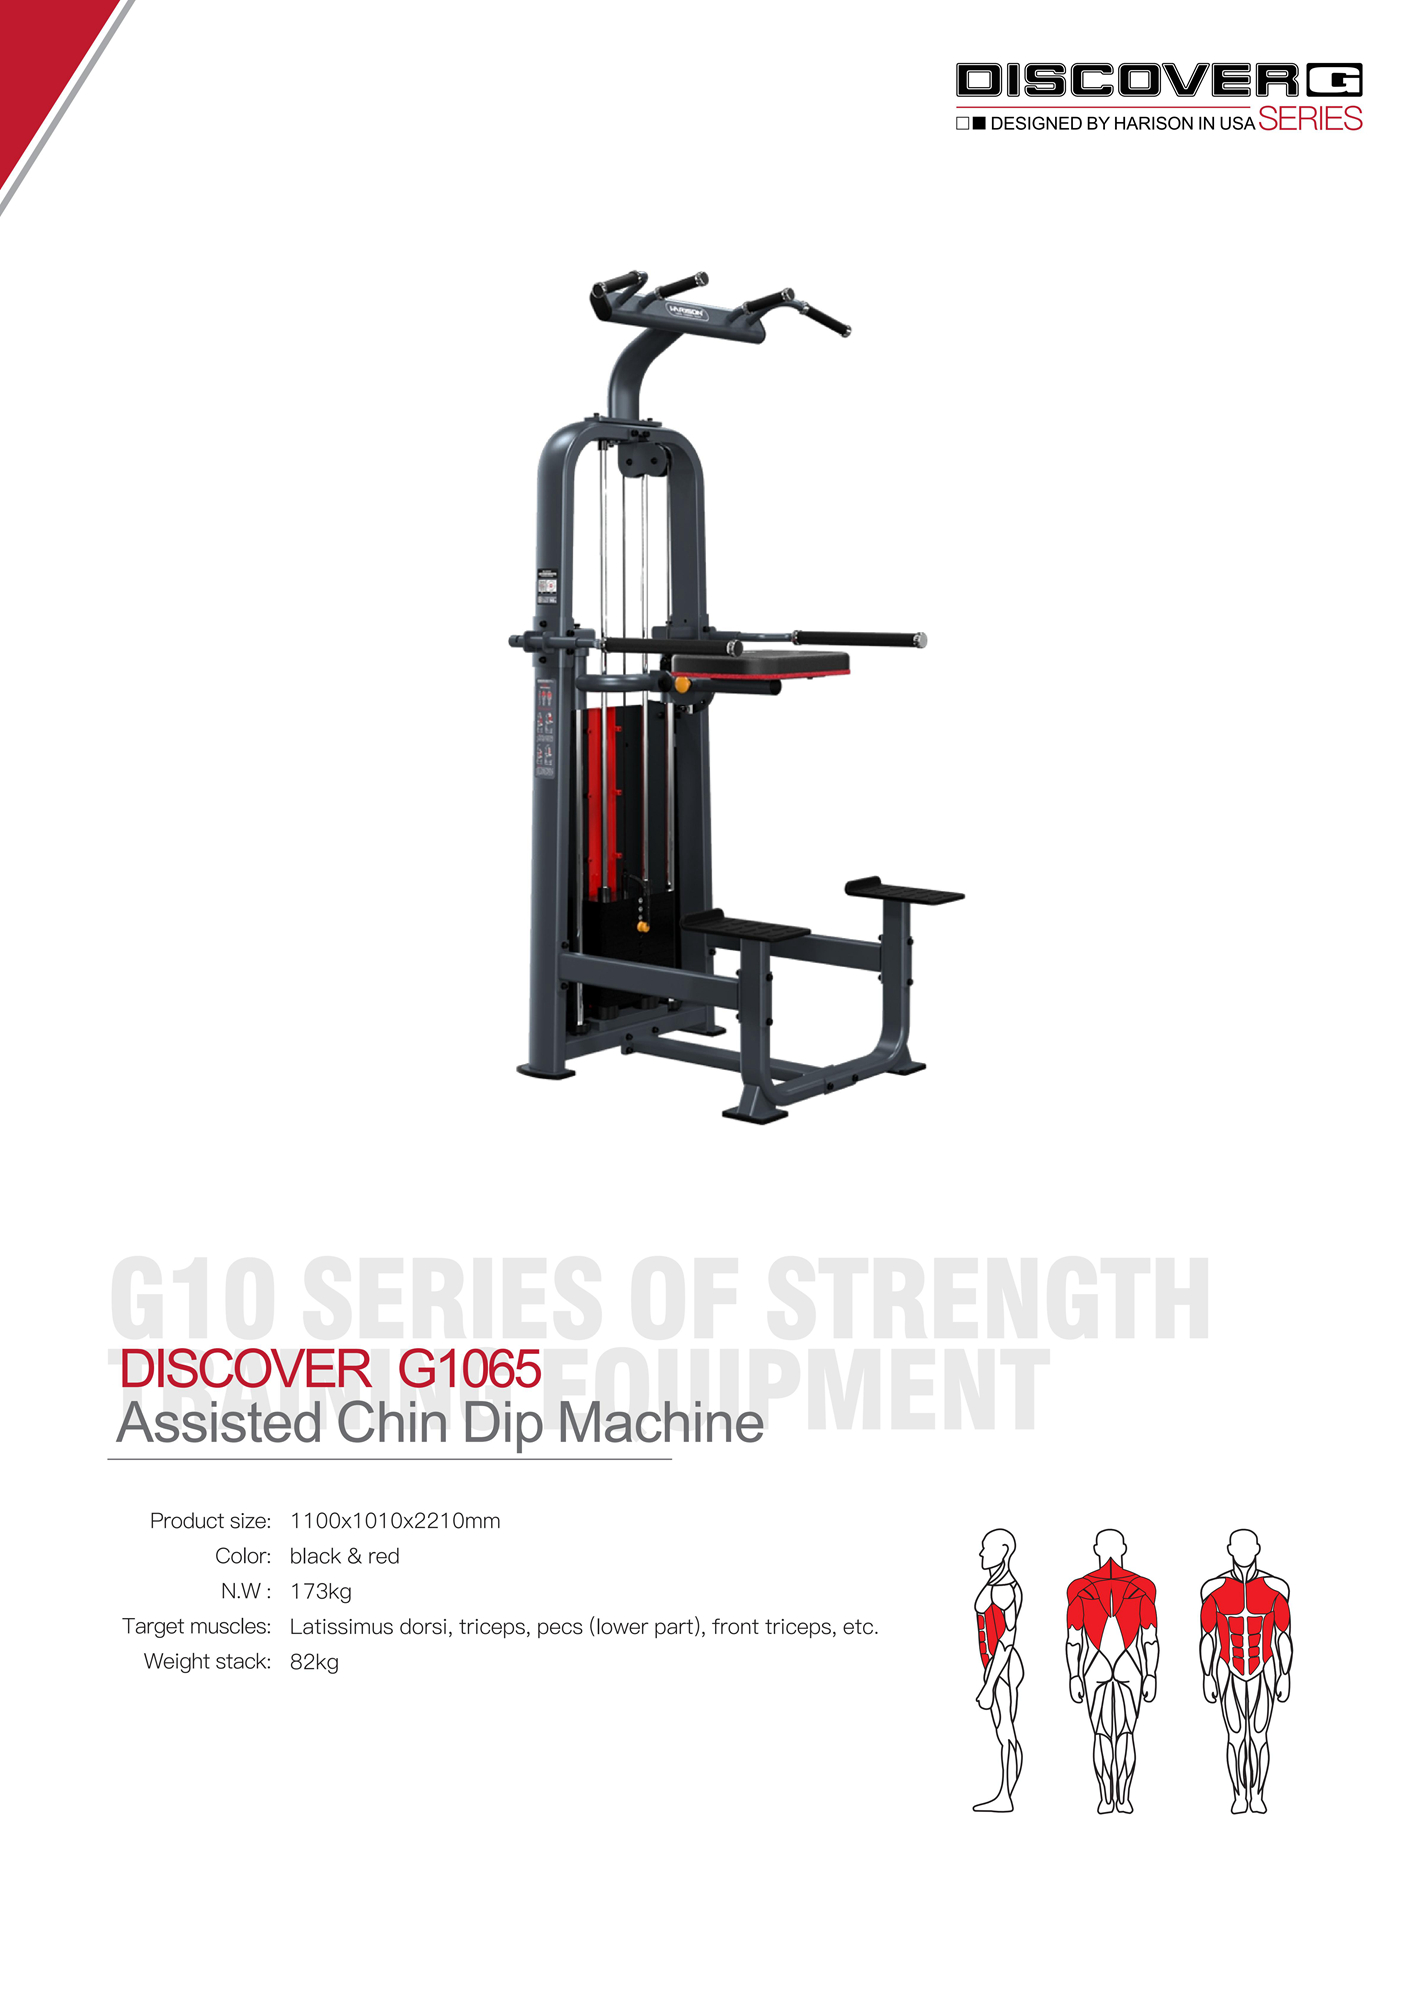 DISCOVER G1065 Assisted Chin Dip Machine